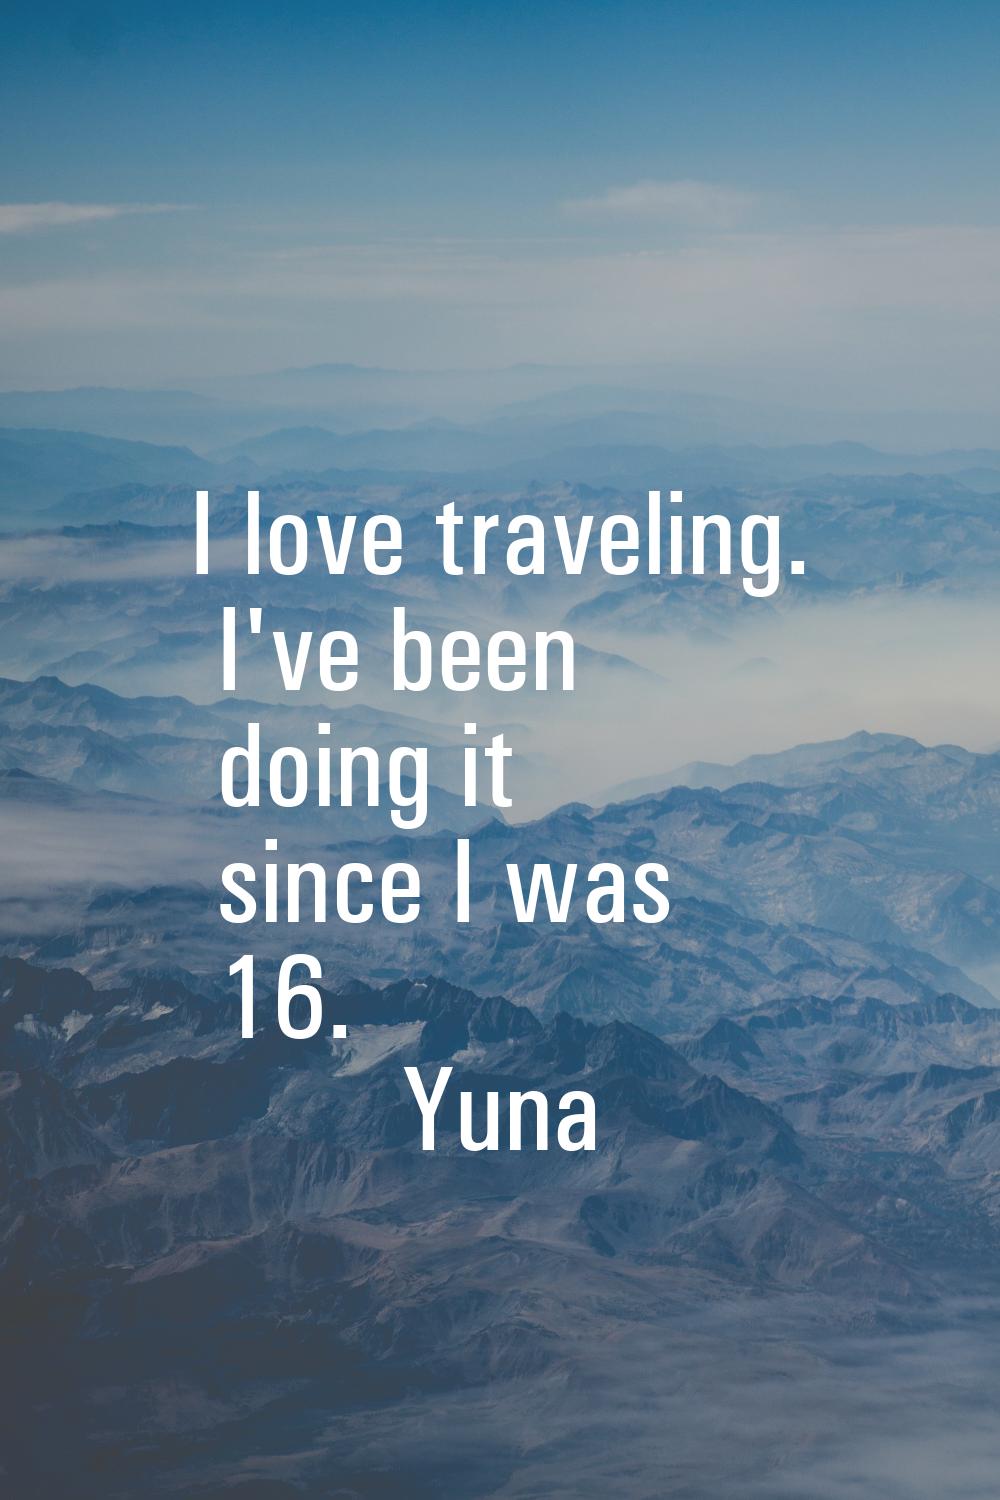 I love traveling. I've been doing it since I was 16.